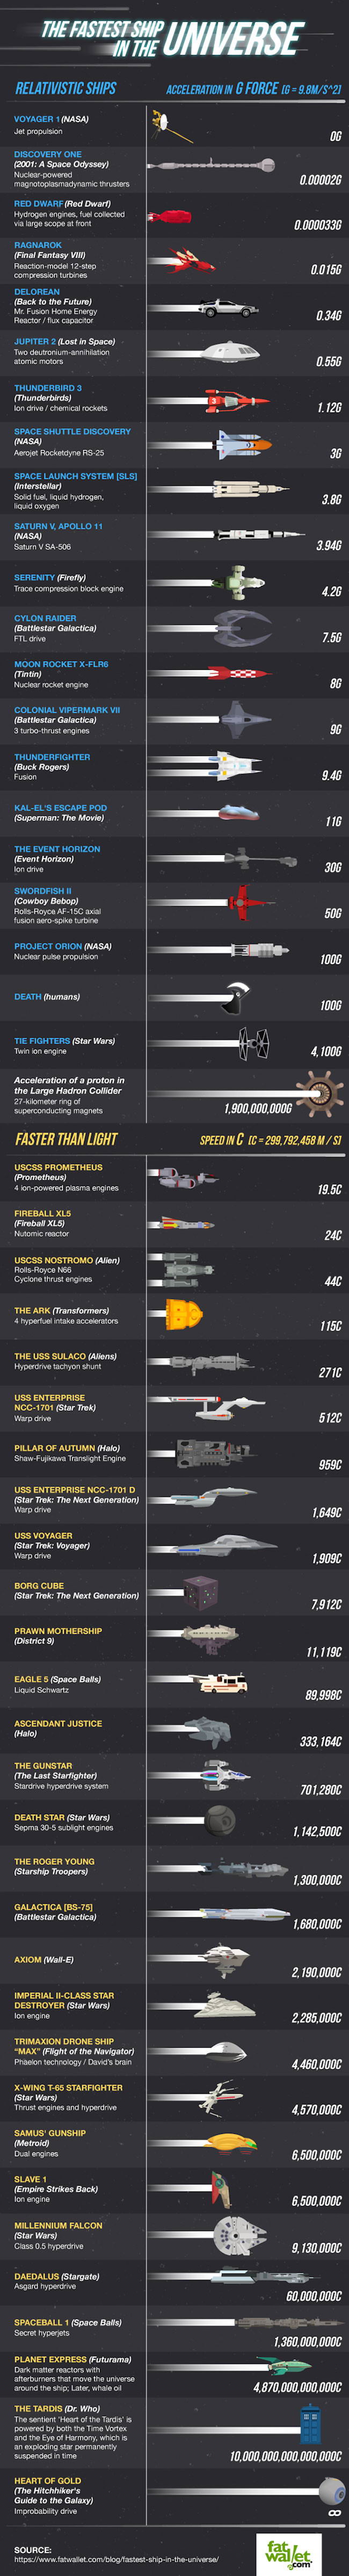 Heres-an-infographic-on-the-fastest-spaceships-in-all-of-sci-fi1-650x4794